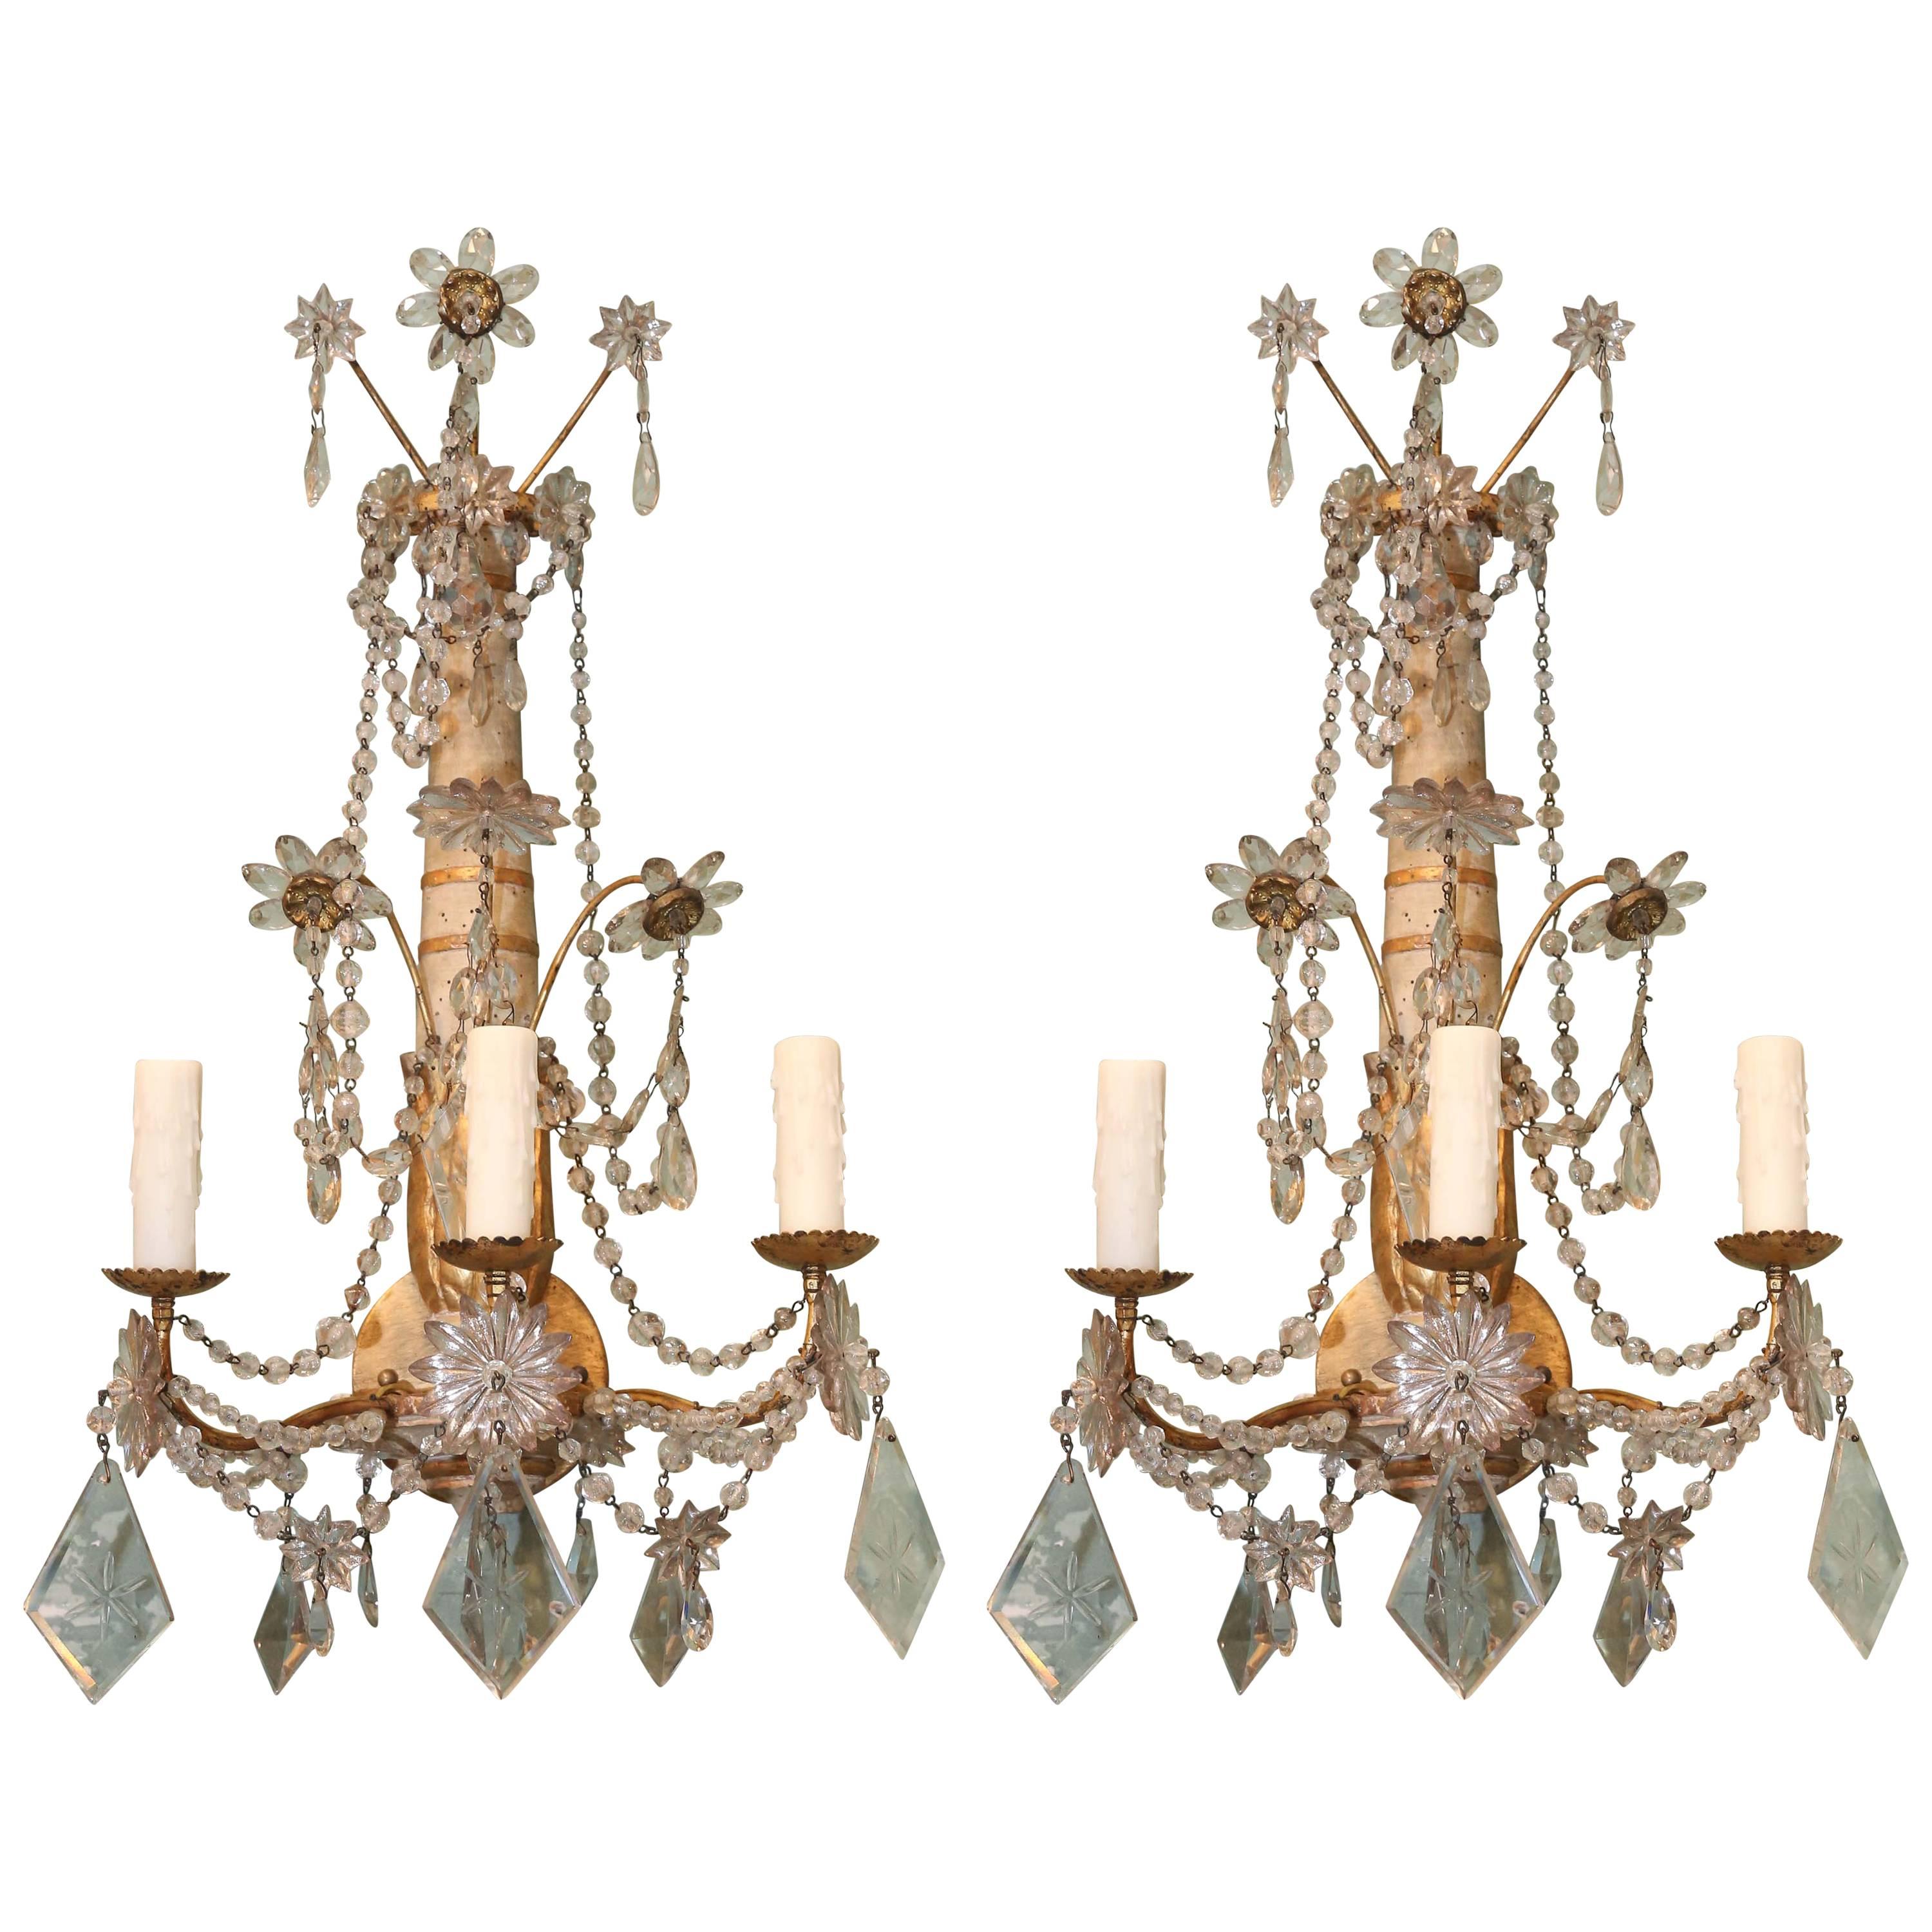 Pair of Sconces from Genoa